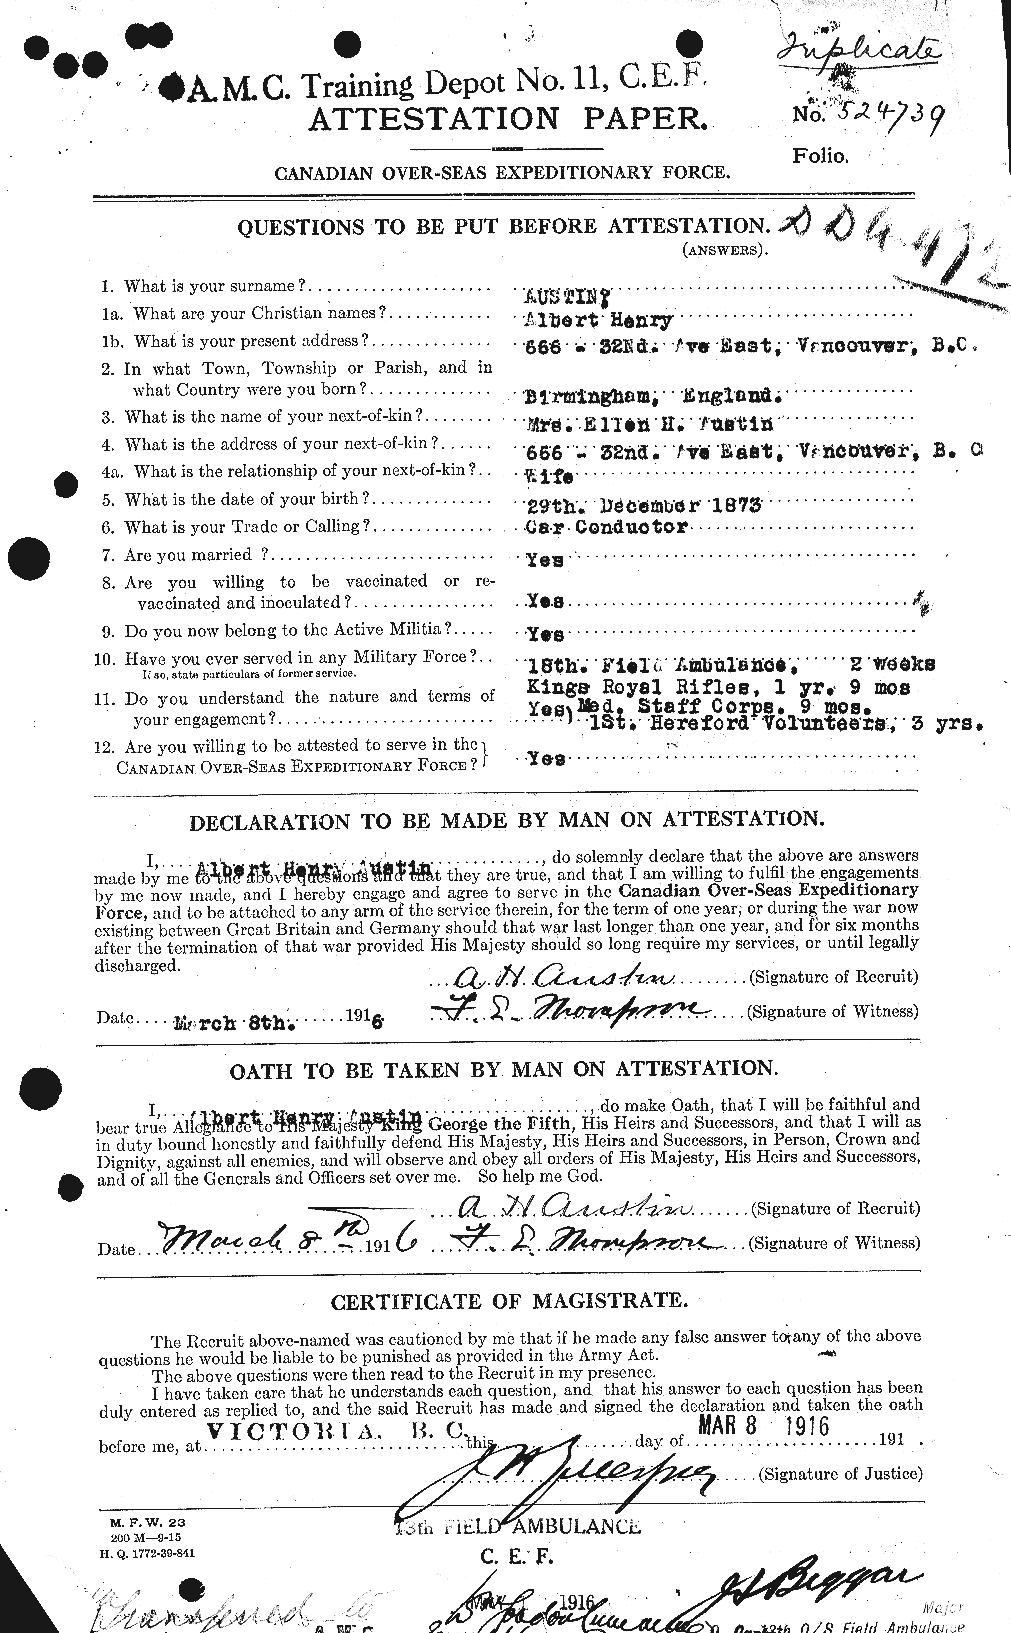 Personnel Records of the First World War - CEF 215474a